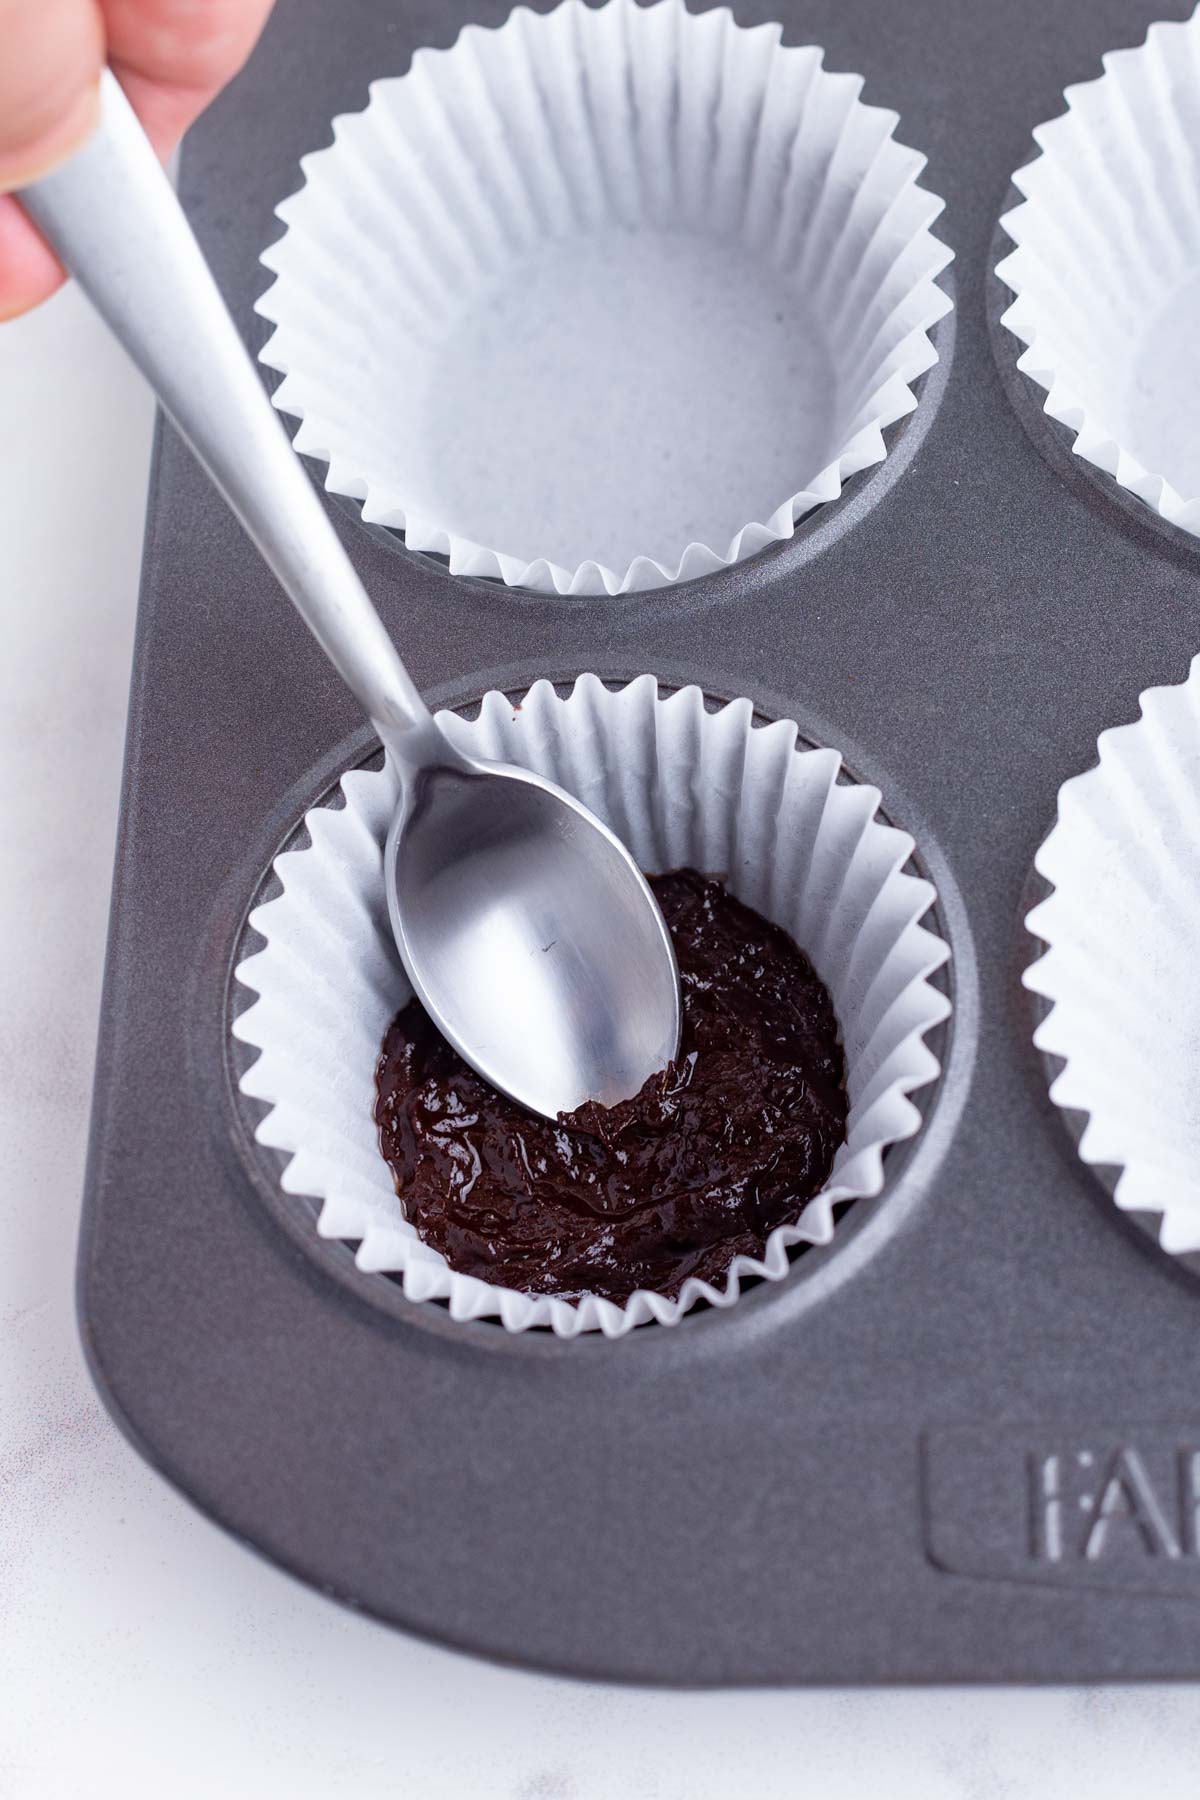 Liquid chocolate is place in the bottom of the muffin liner.